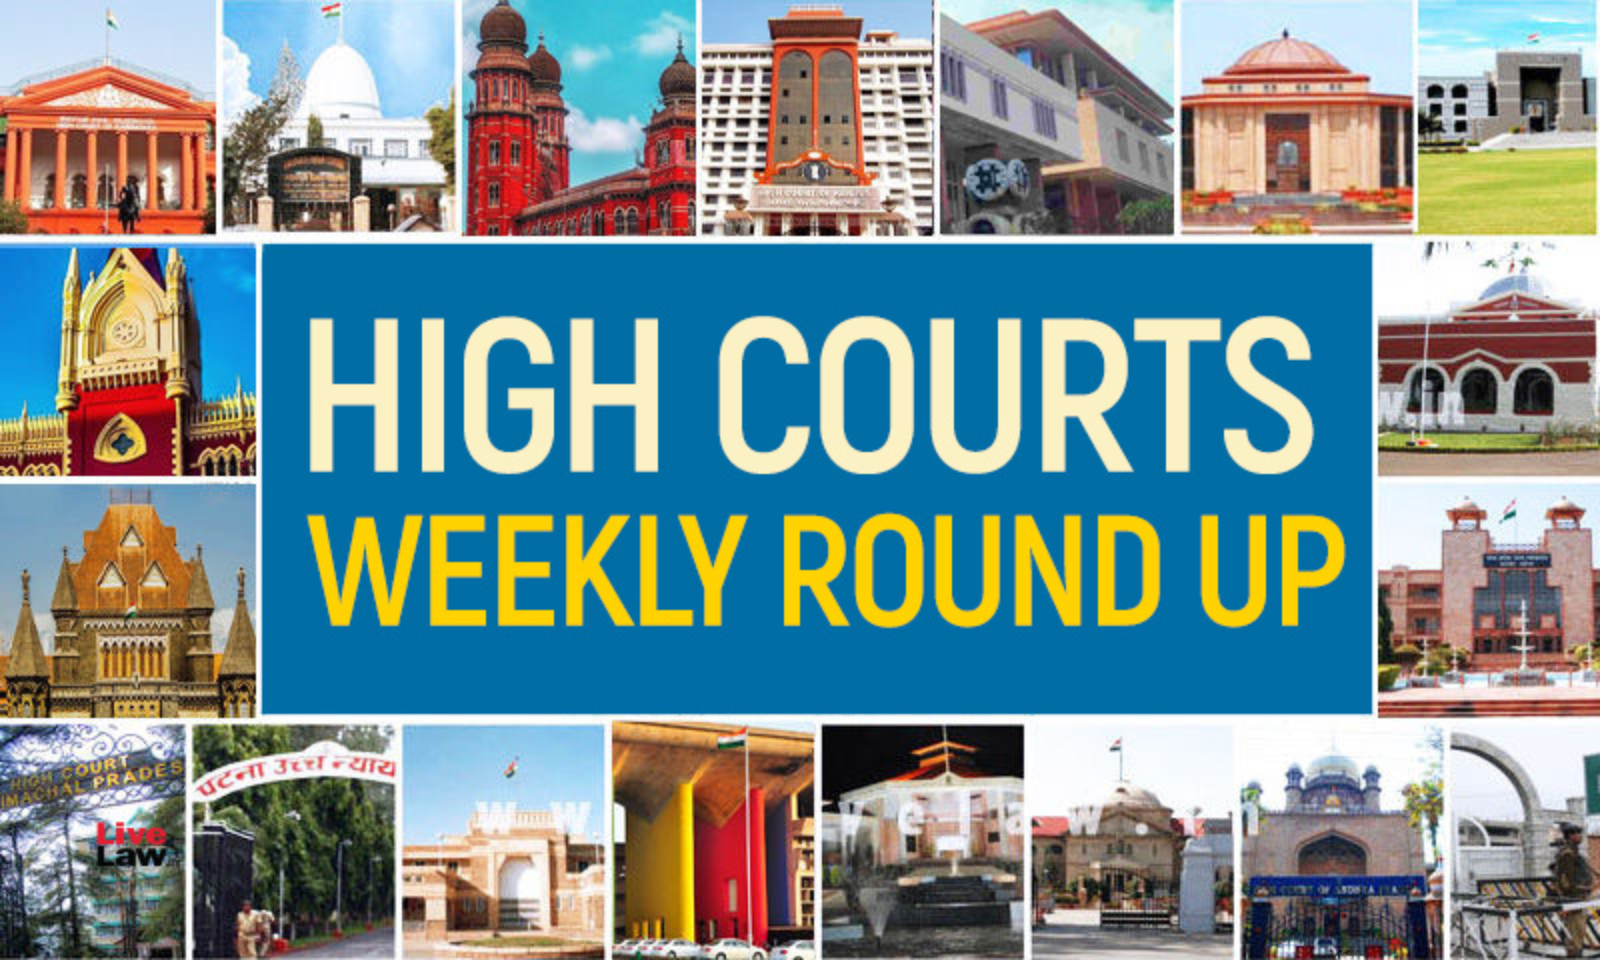 Skul Wali Ka Rep Sexx - All High Courts Weekly Round-Up (June 06, 2022 - June 12, 2022)